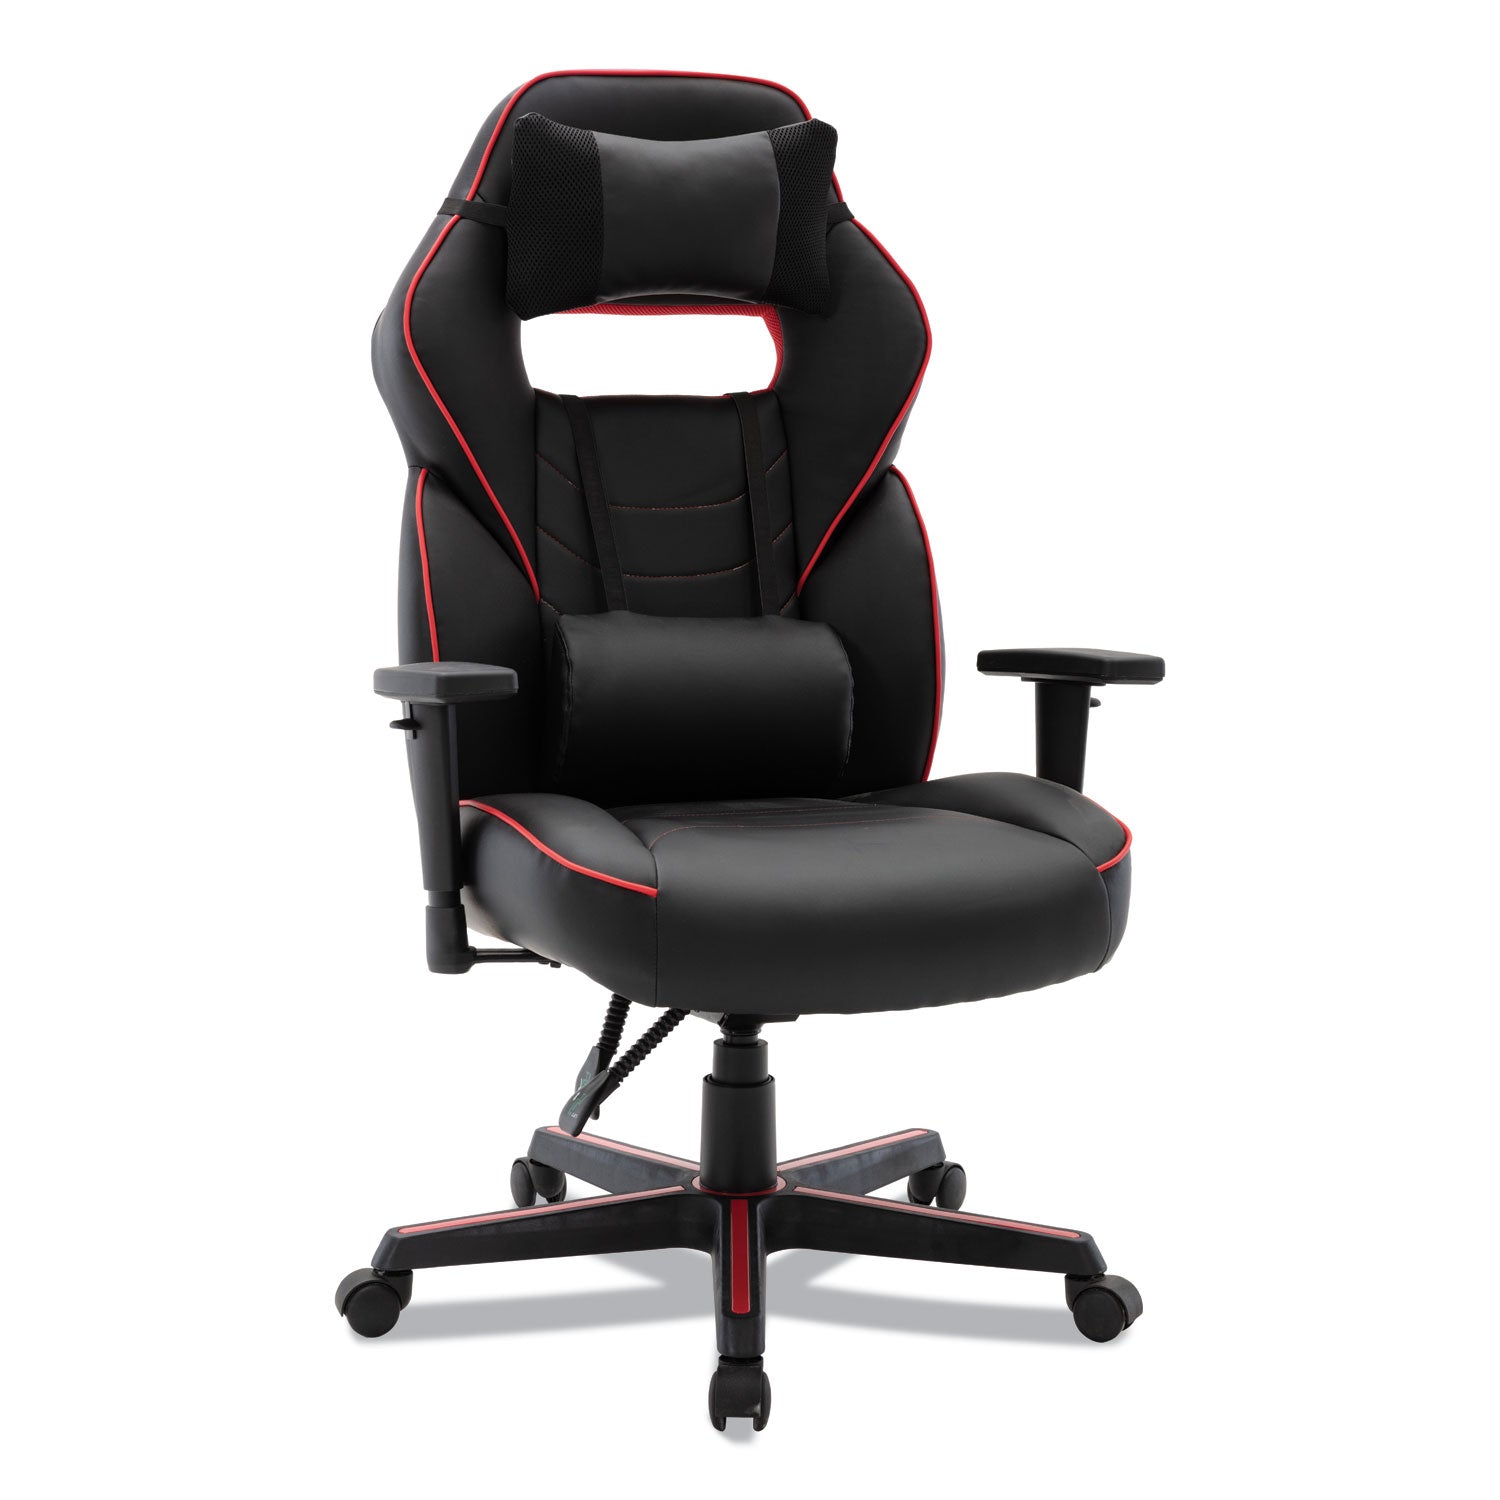 racing-style-ergonomic-gaming-chair-supports-275-lb-1591-to-198-seat-height-black-red-trim-seat-back-black-red-base_alegm4136 - 5